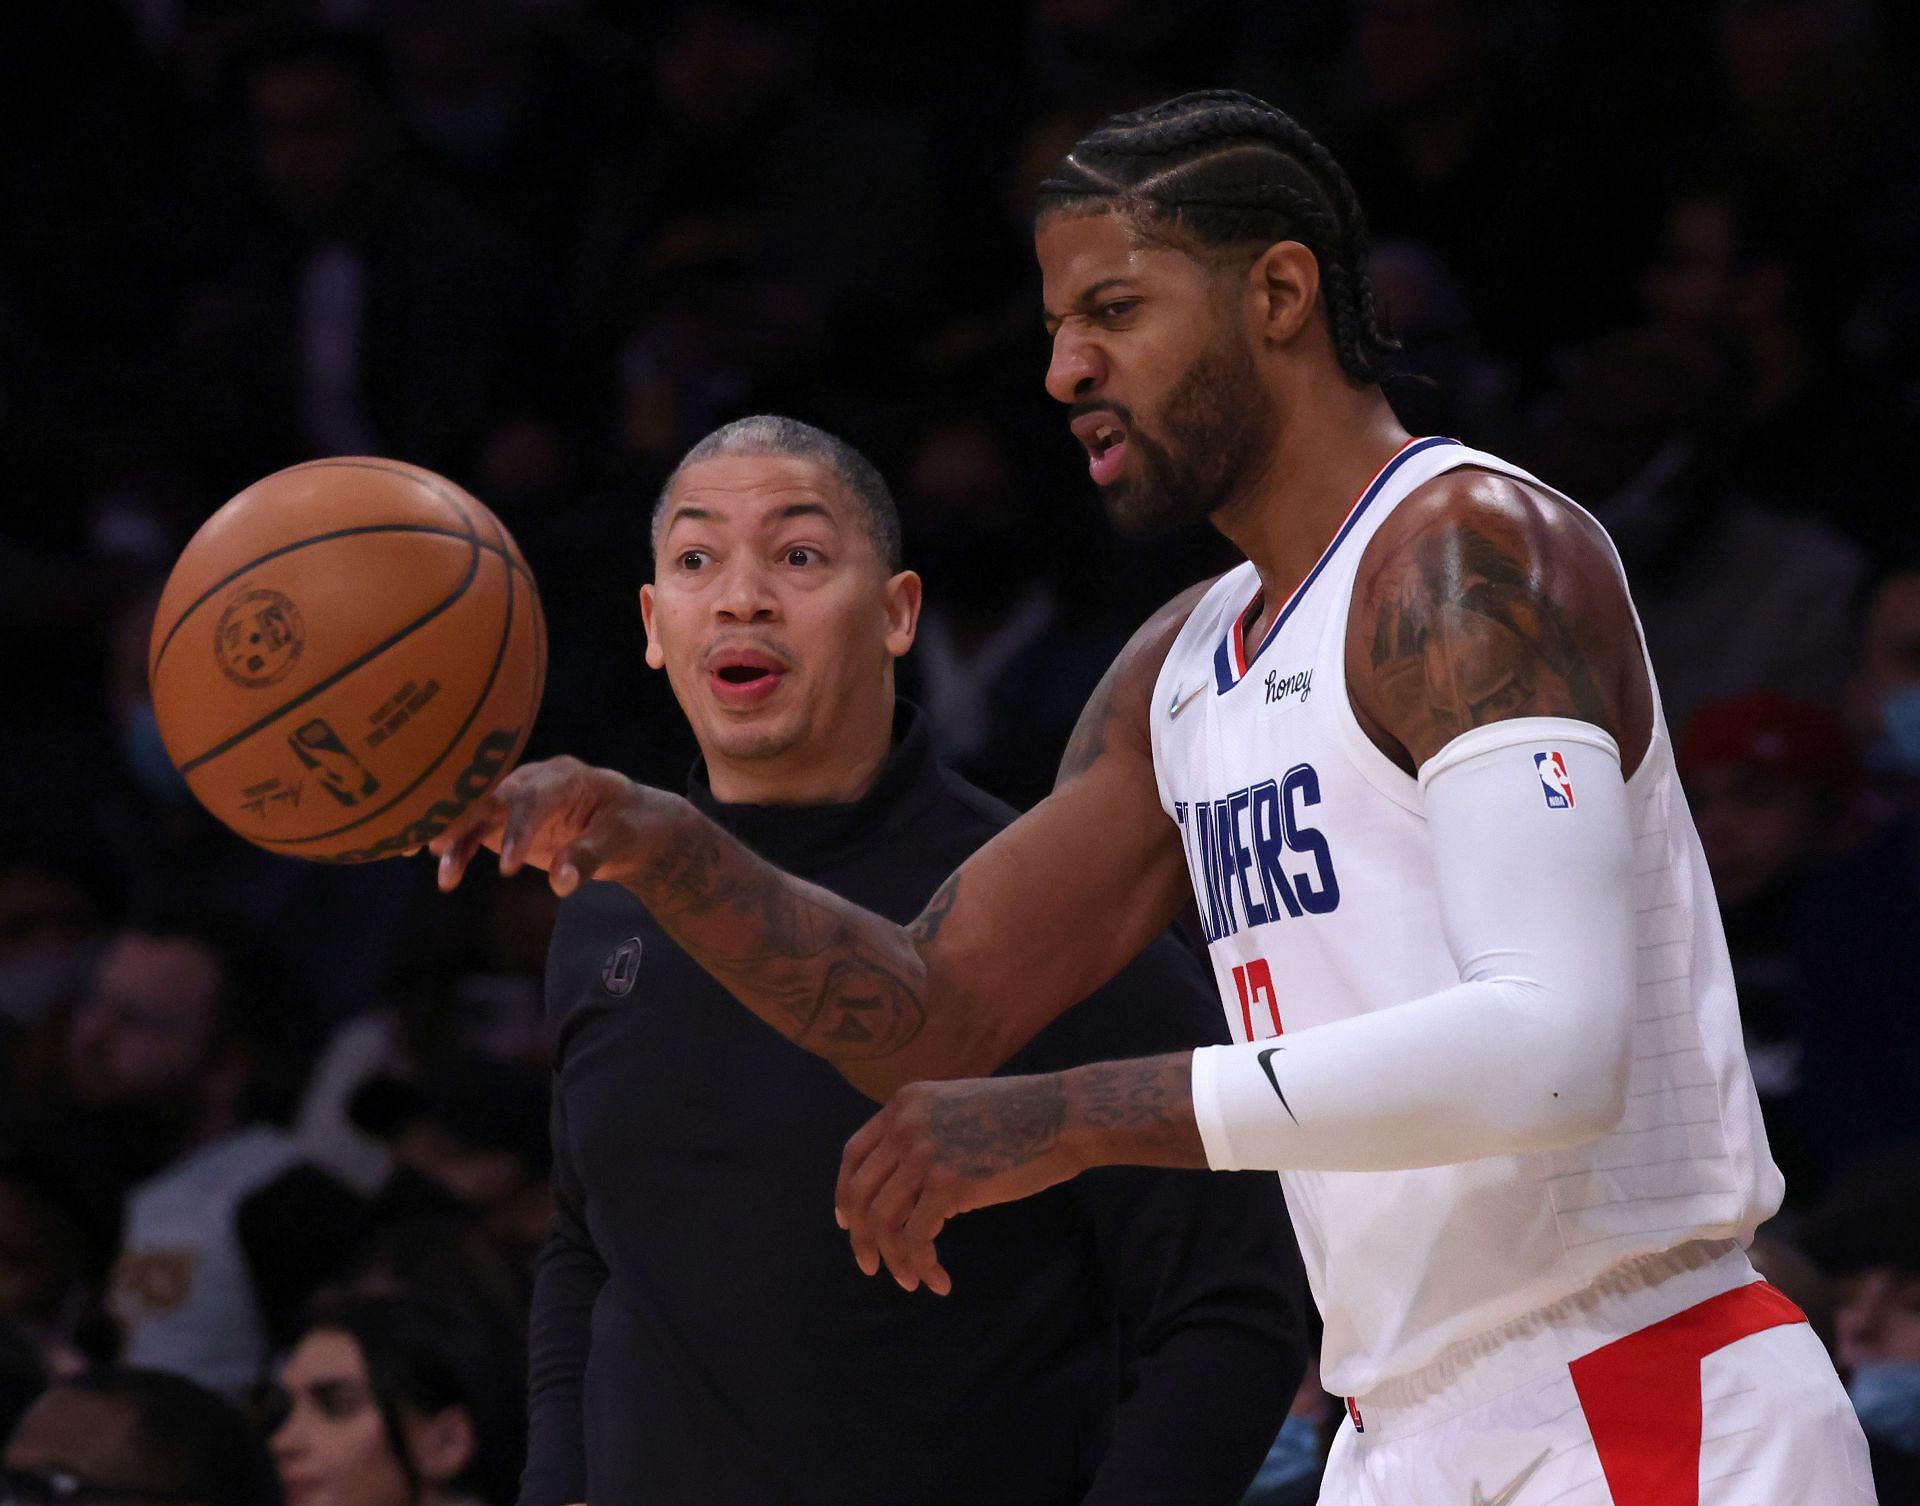 Head coach Tyronn Lue of the LA Clippers calls a play in front of Paul George #13 during the first half against the Los Angeles Lakers at Staples Center on December 03, 2021 in Los Angeles, California.